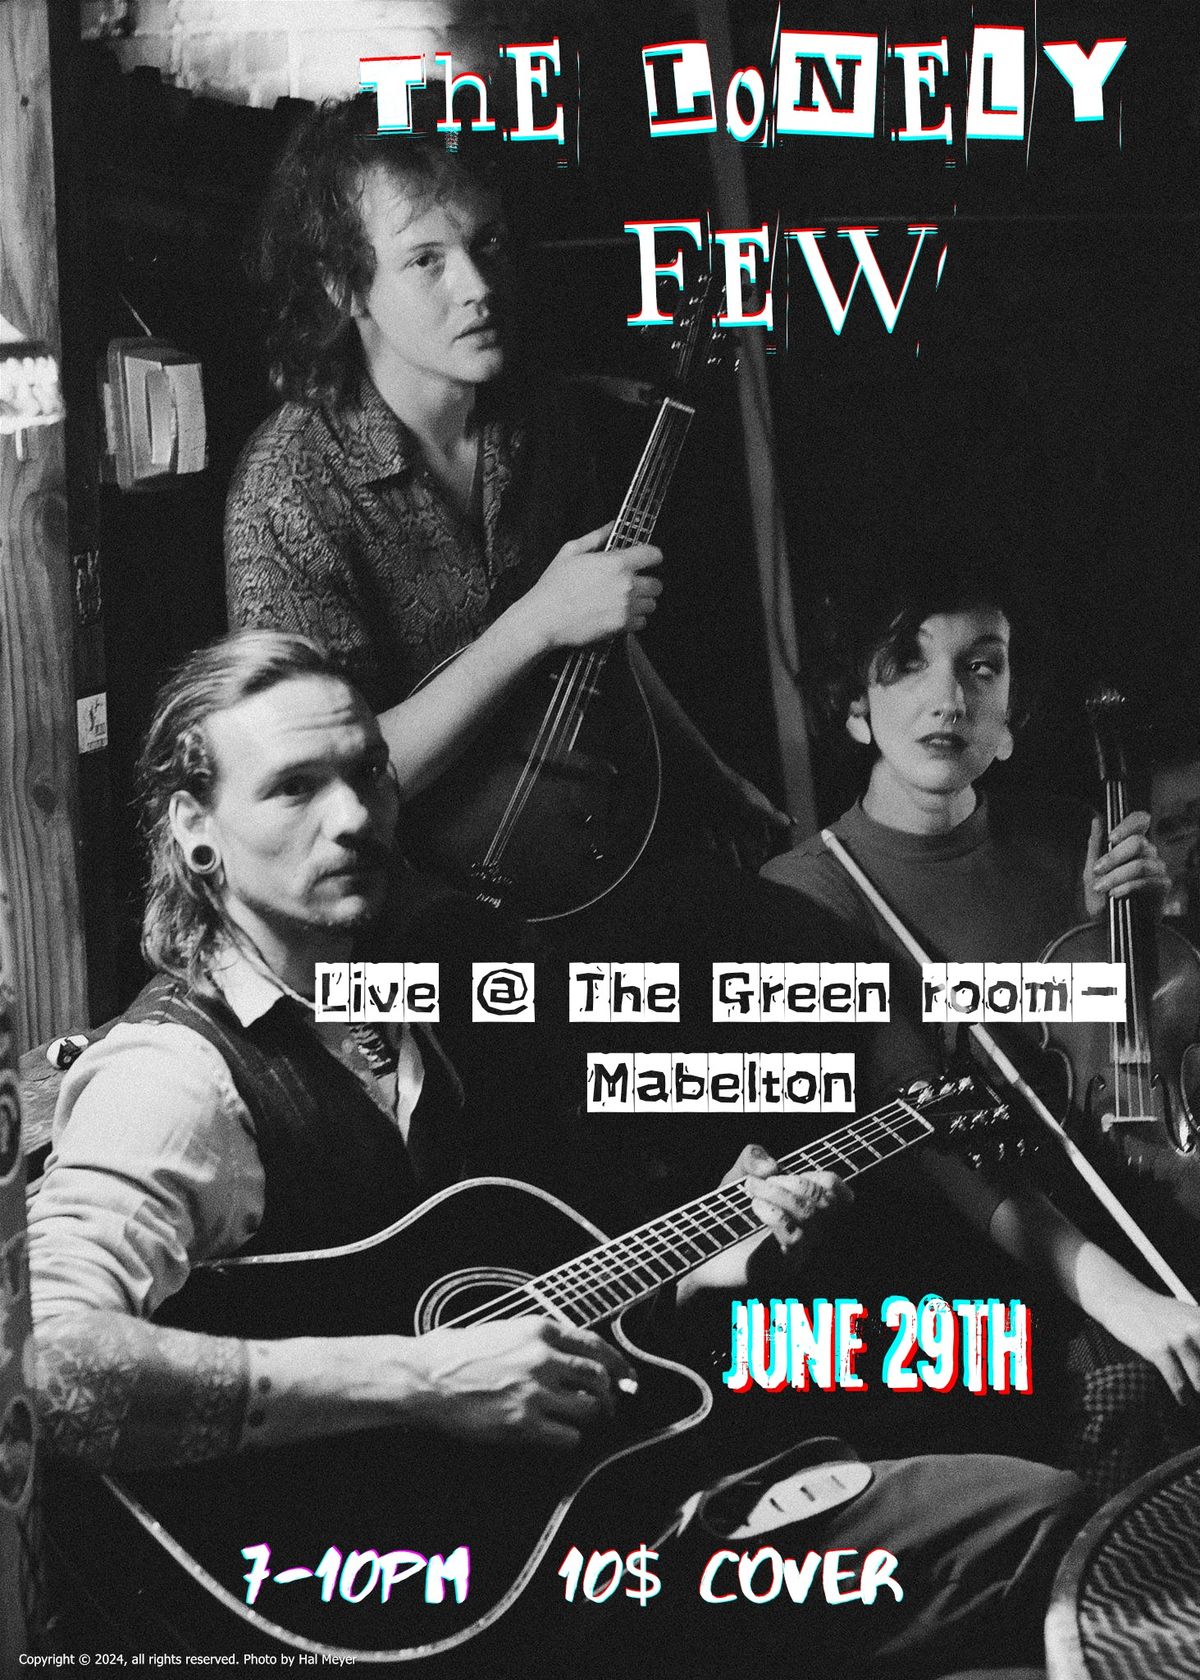 The Lonely Few @ The Green Room-Mabelton